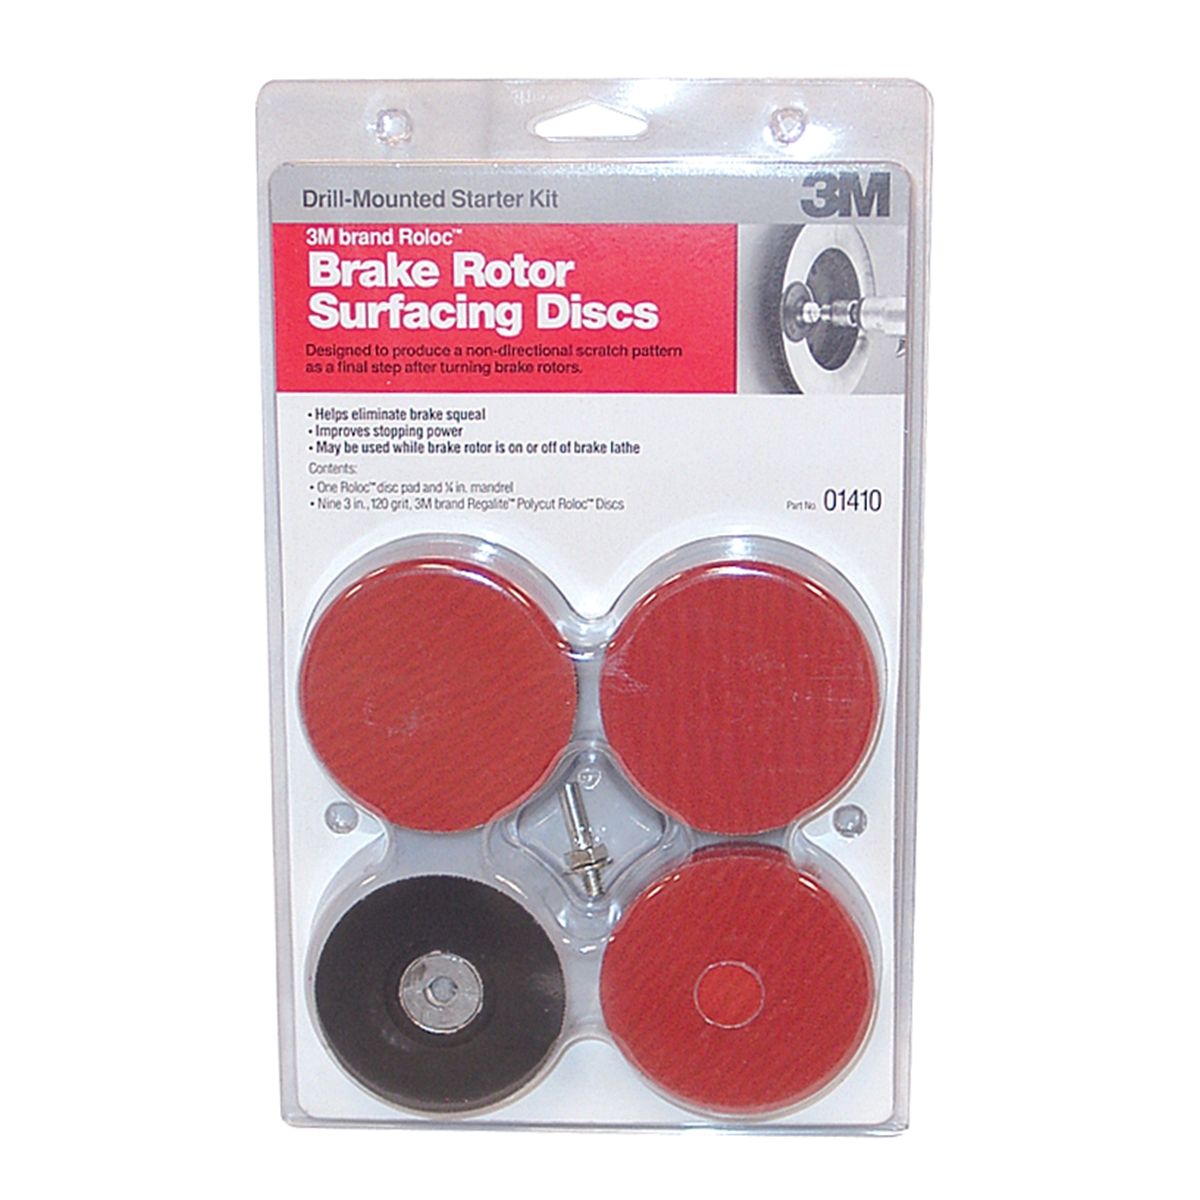 Brake Rotor Surface Conditioning Discs 120 Grit Roloc